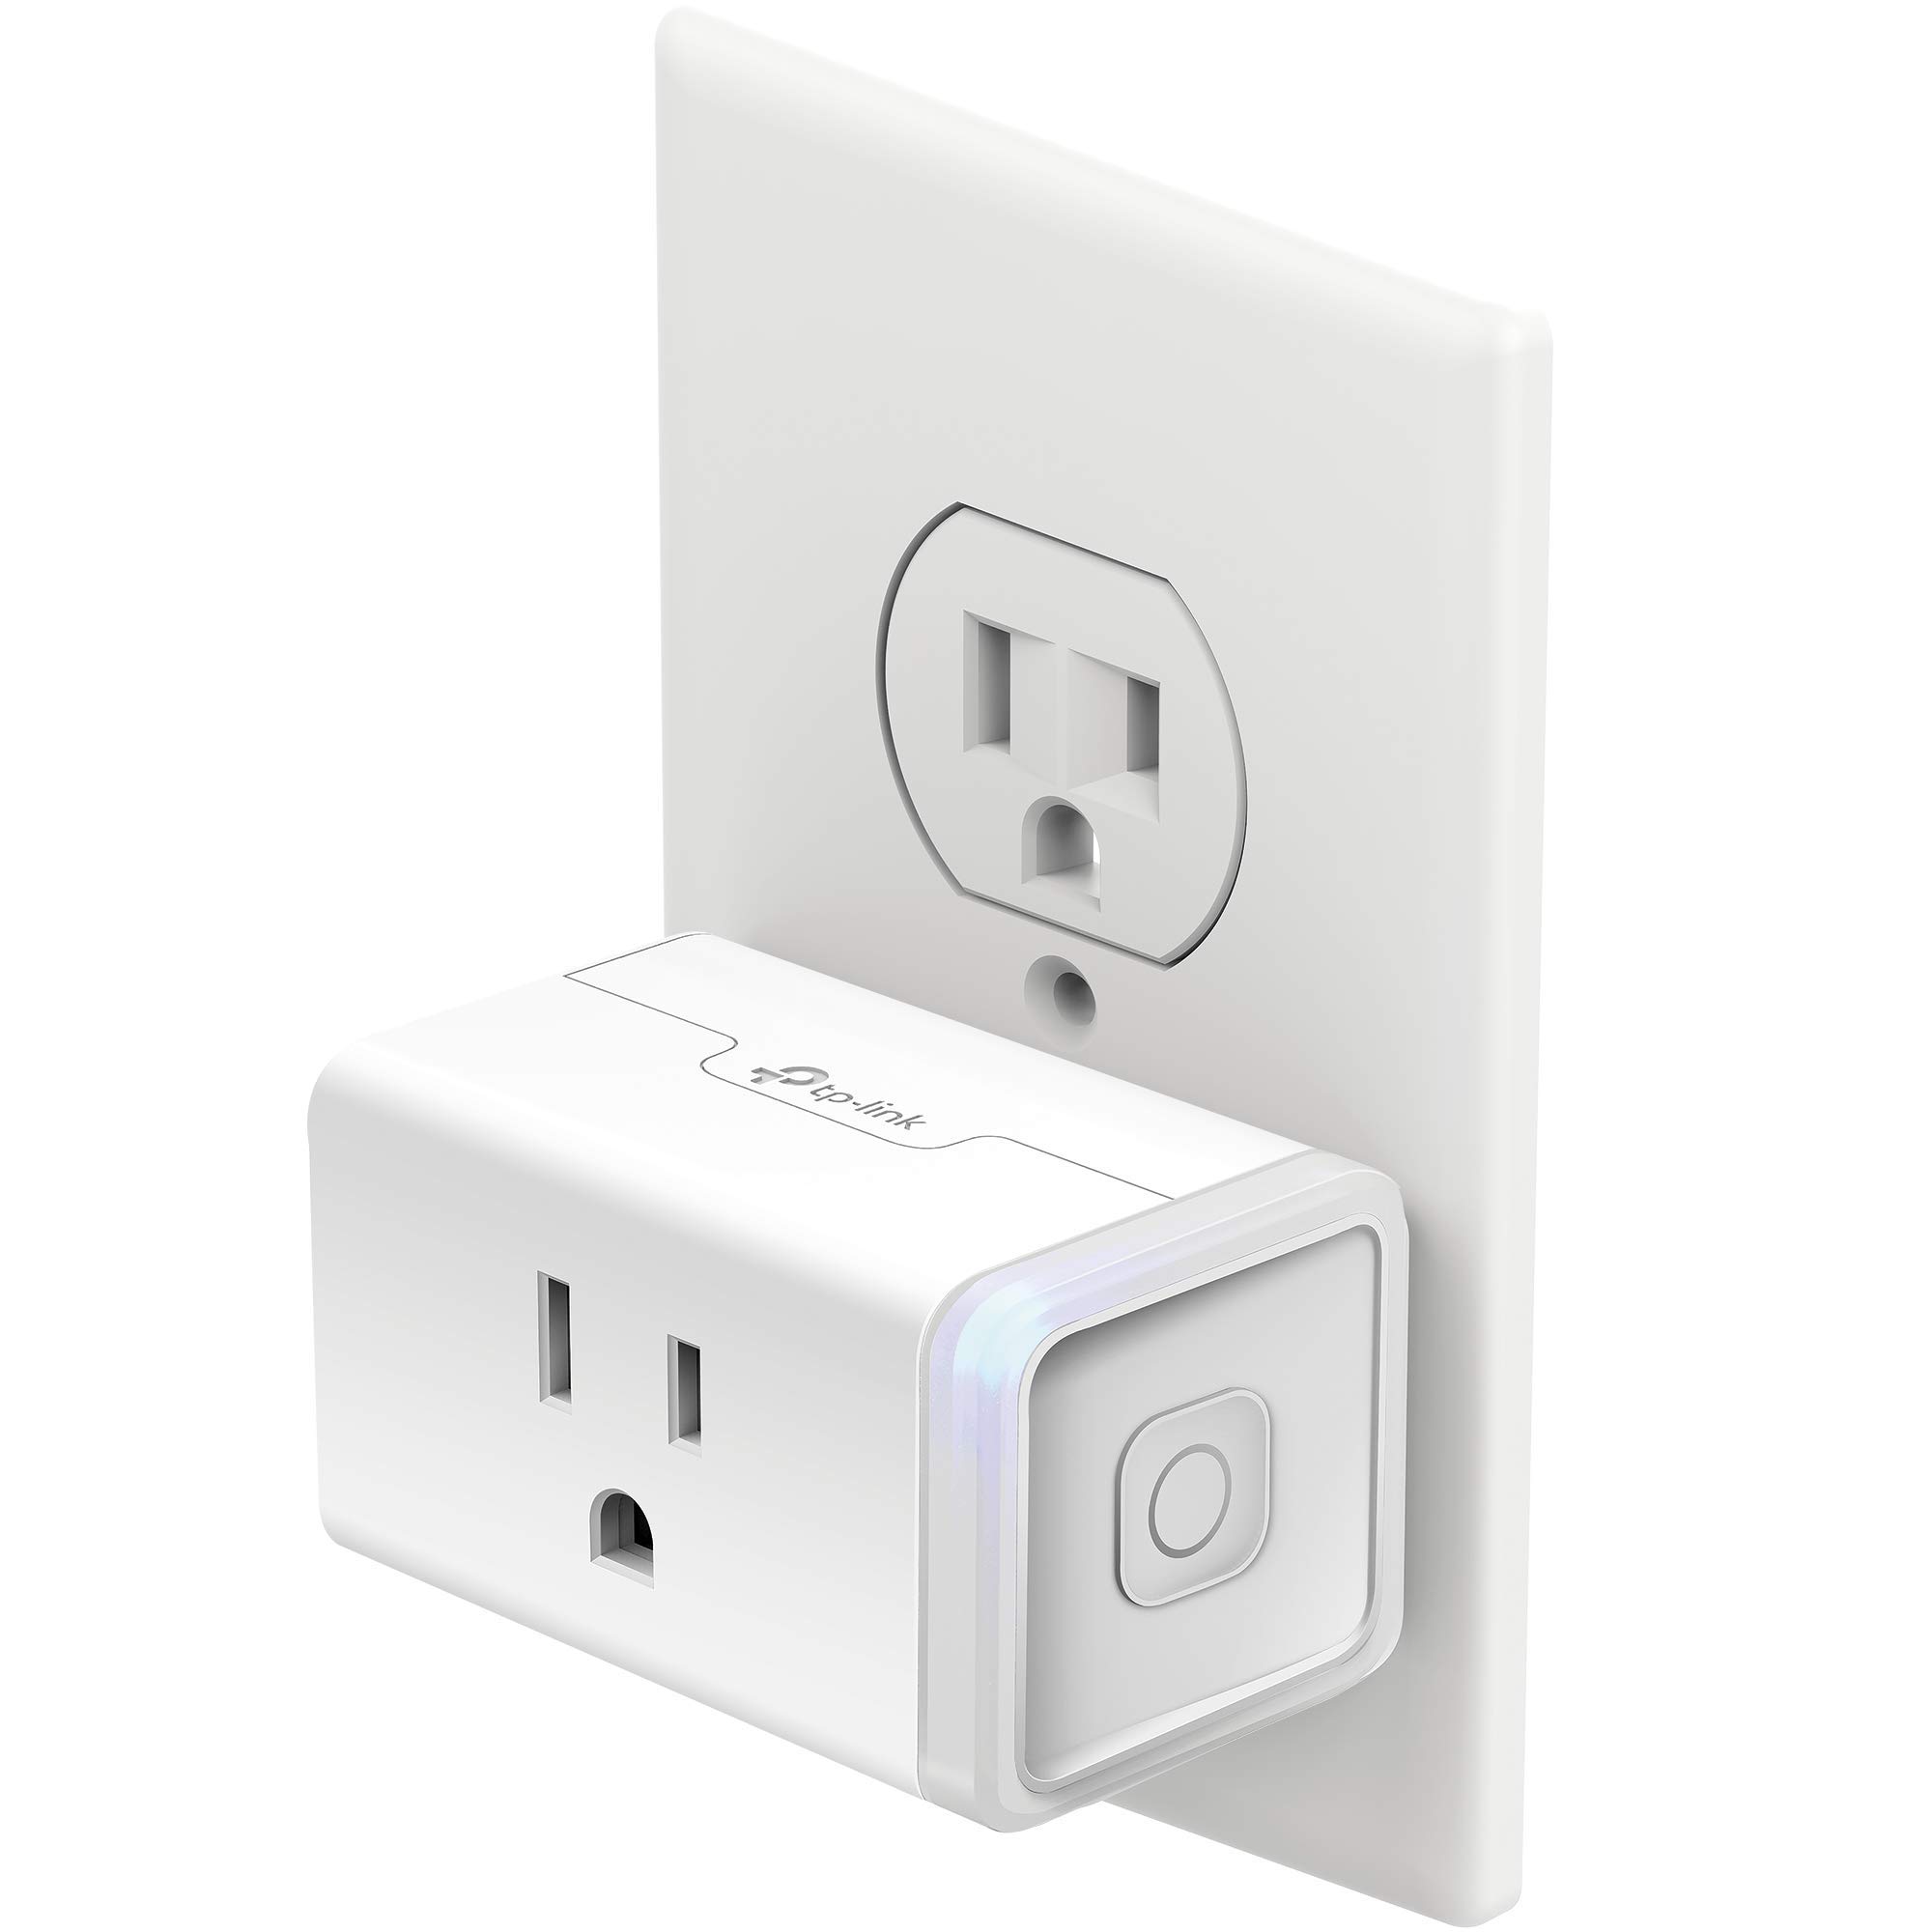 Kasa Smart Plug Mini with Energy Monitoring, Smart Home Wi-Fi Outlet Works with Alexa, Google Home & IFTTT, Wi-Fi Simple Setup, No Hub Required (KP115), White - $10.99